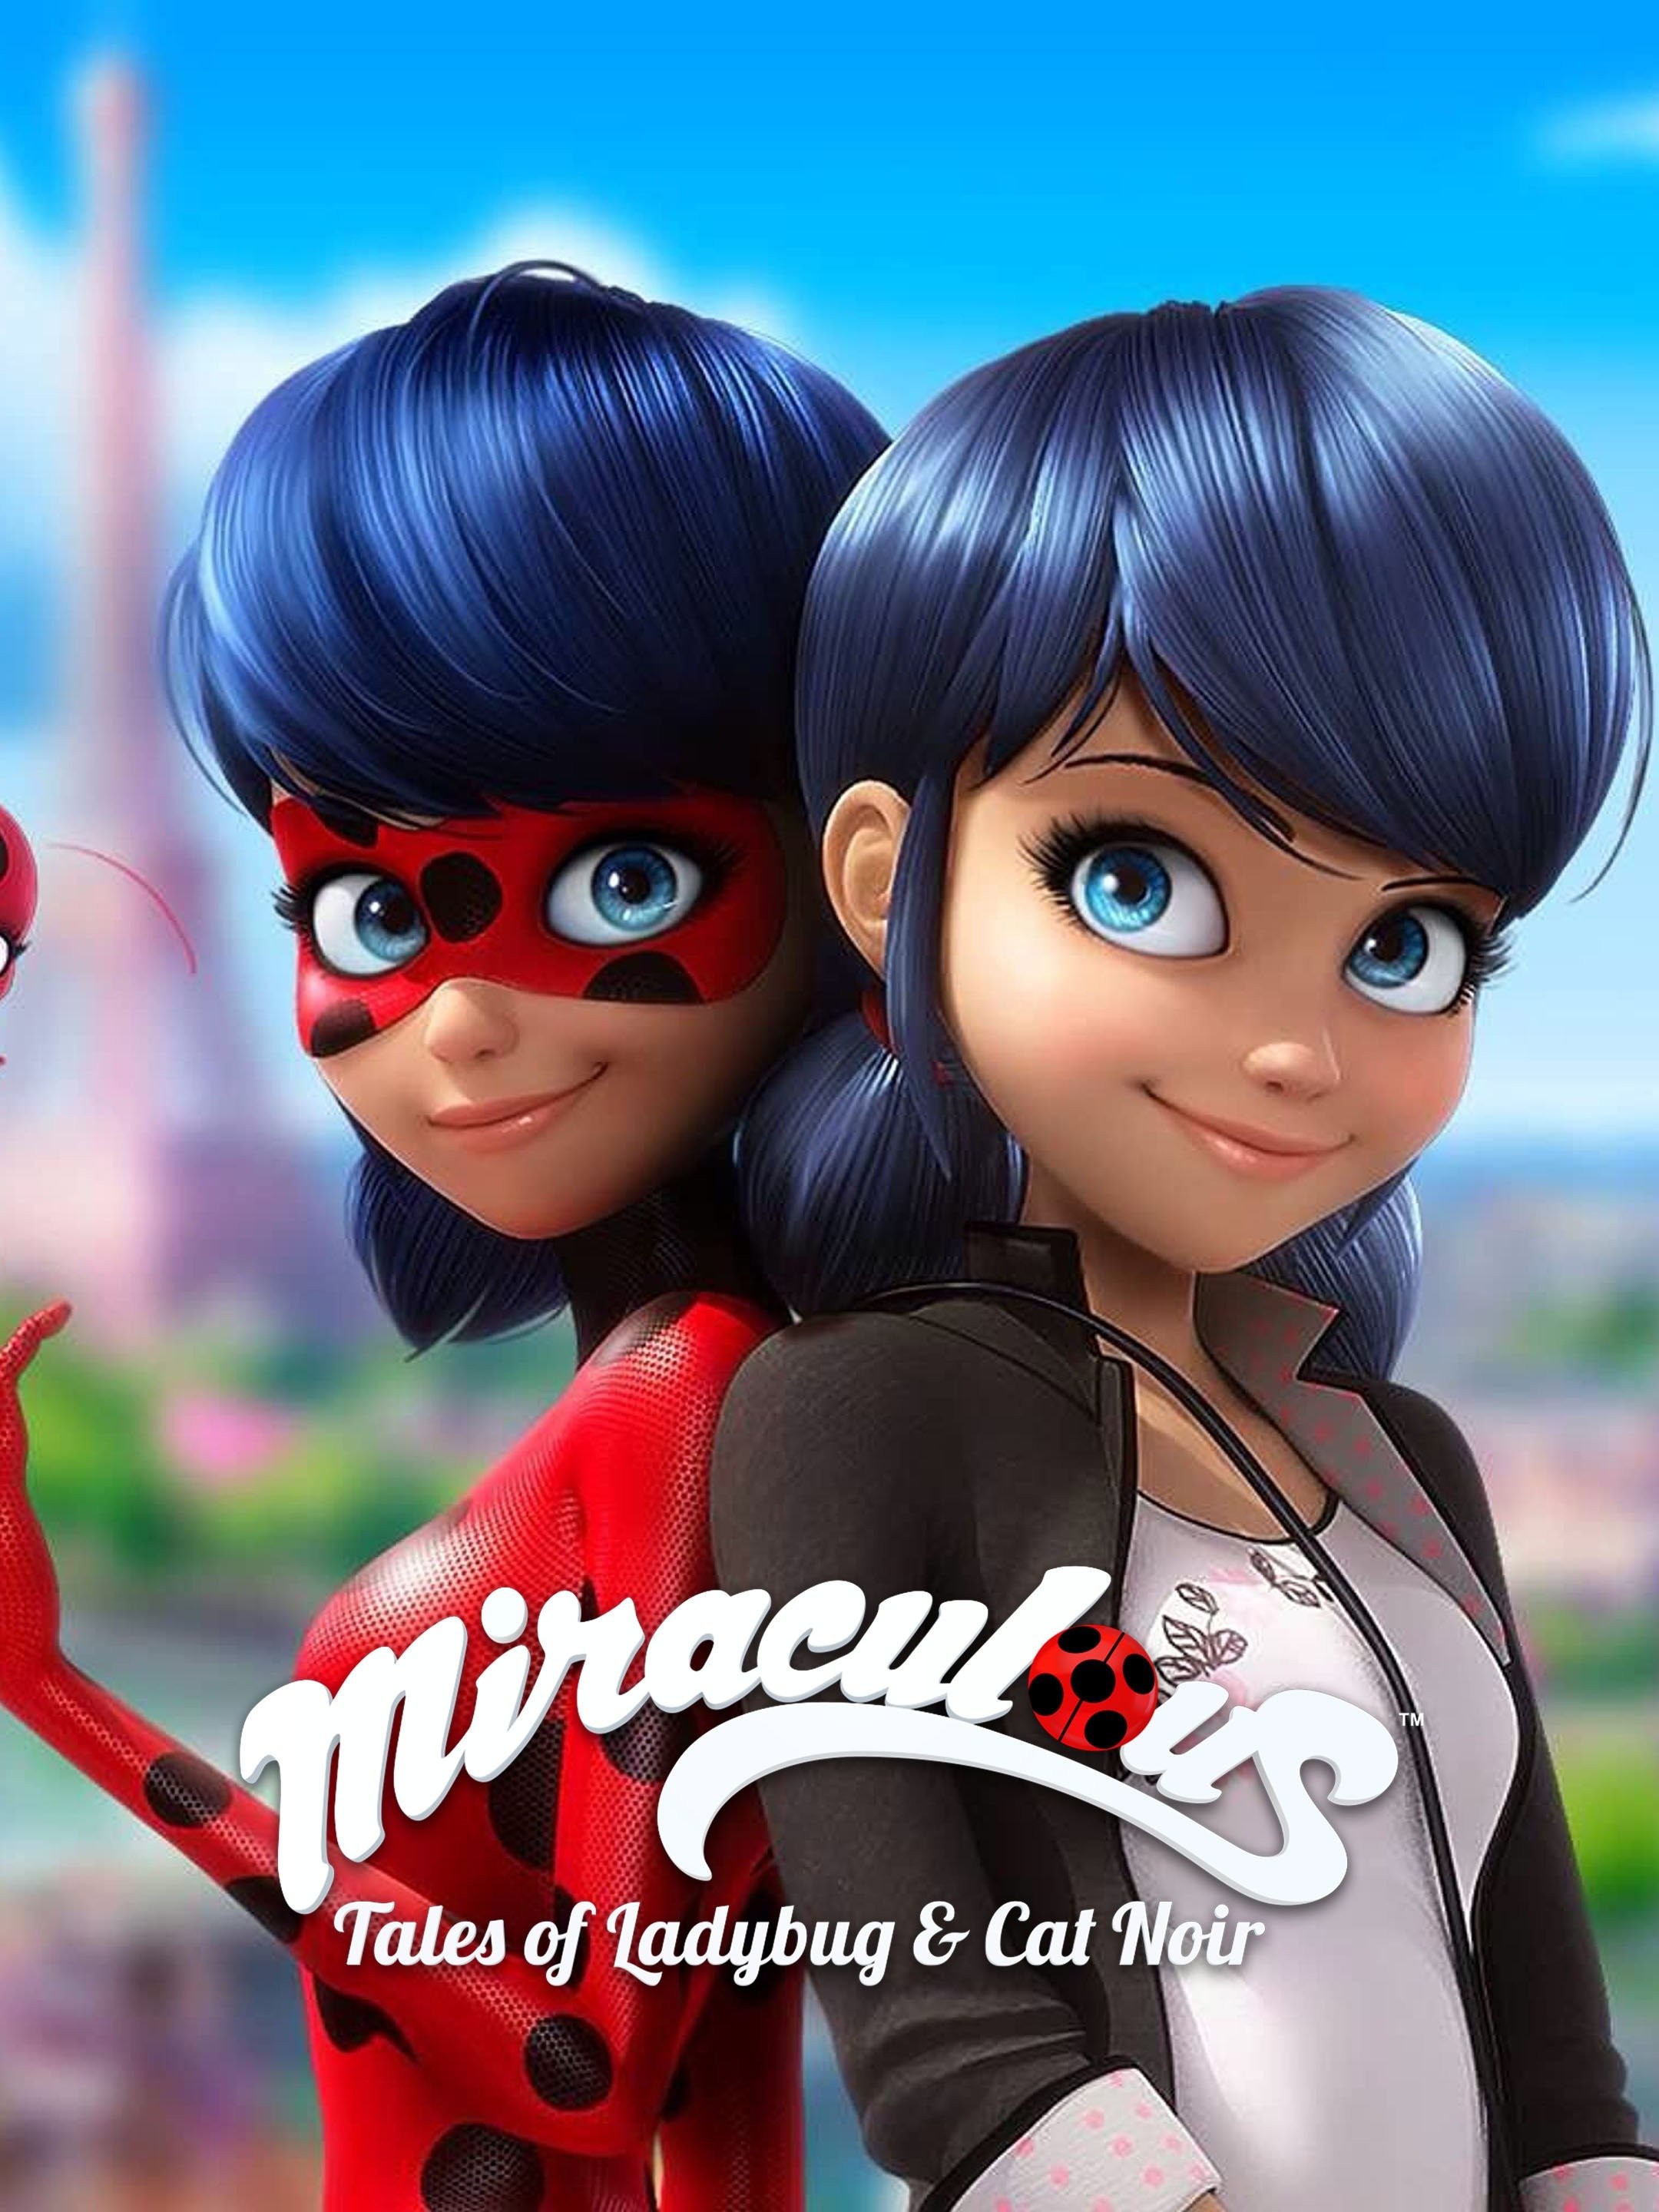 Miraculous Ladybug Season 4 Poster brand new in package